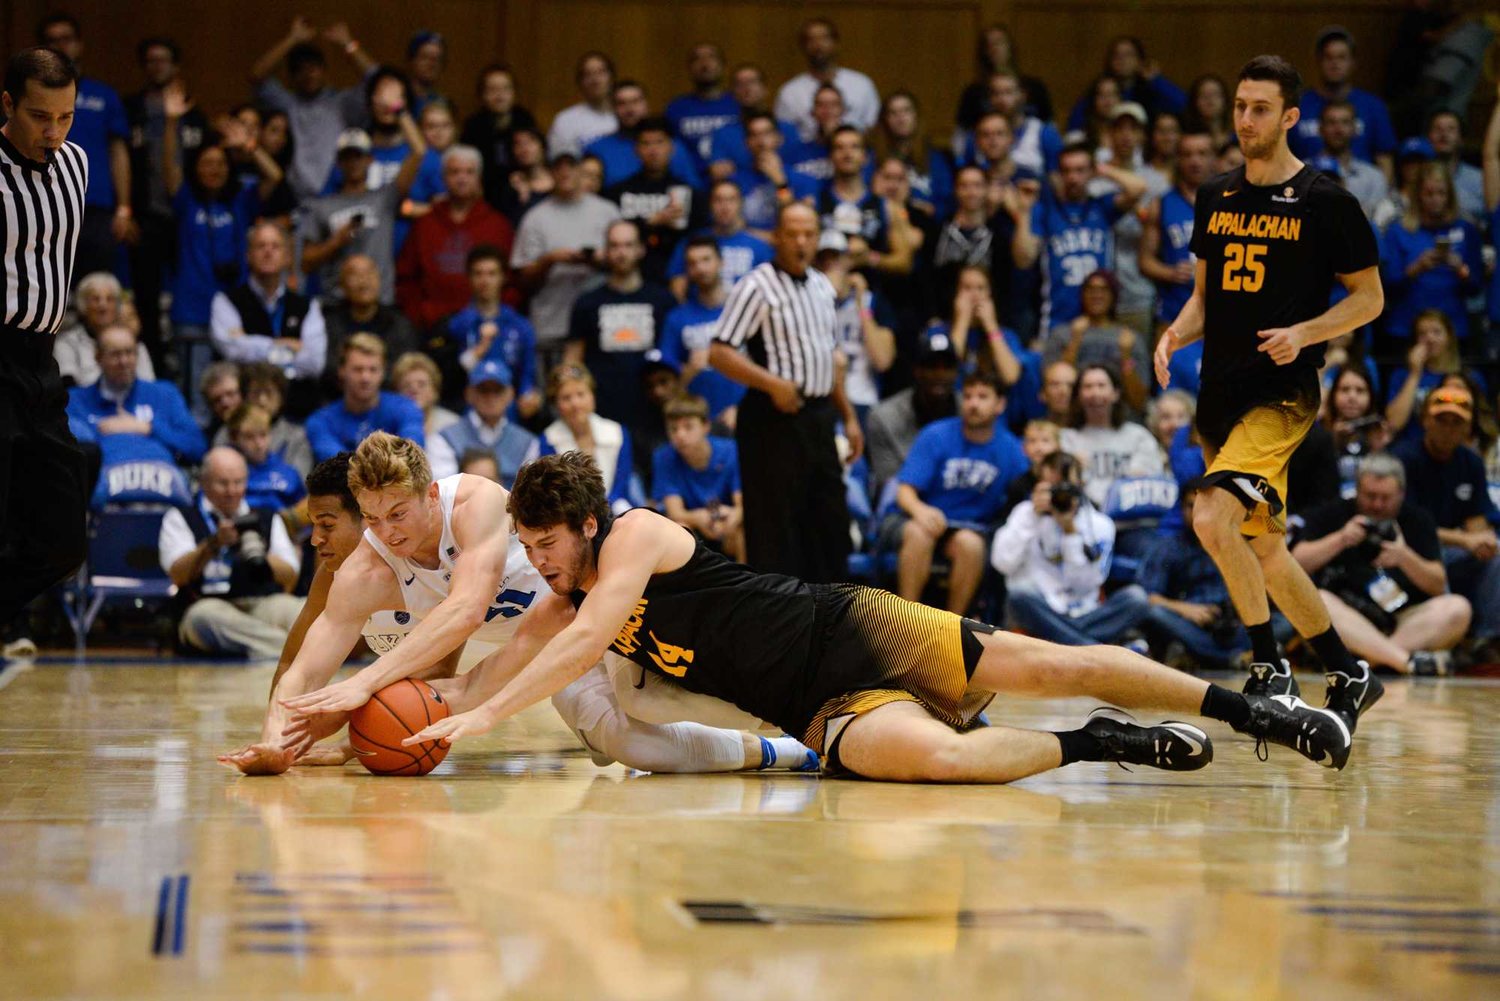 Appalachian State and Duke fighting for the ball in their last face-off, which Duke won 93-58 (Nov/2016). Thirty-five years earlier (1981), the Mountaineers achieved their first and only victory against the Blue Devils, defeating them 75-70.